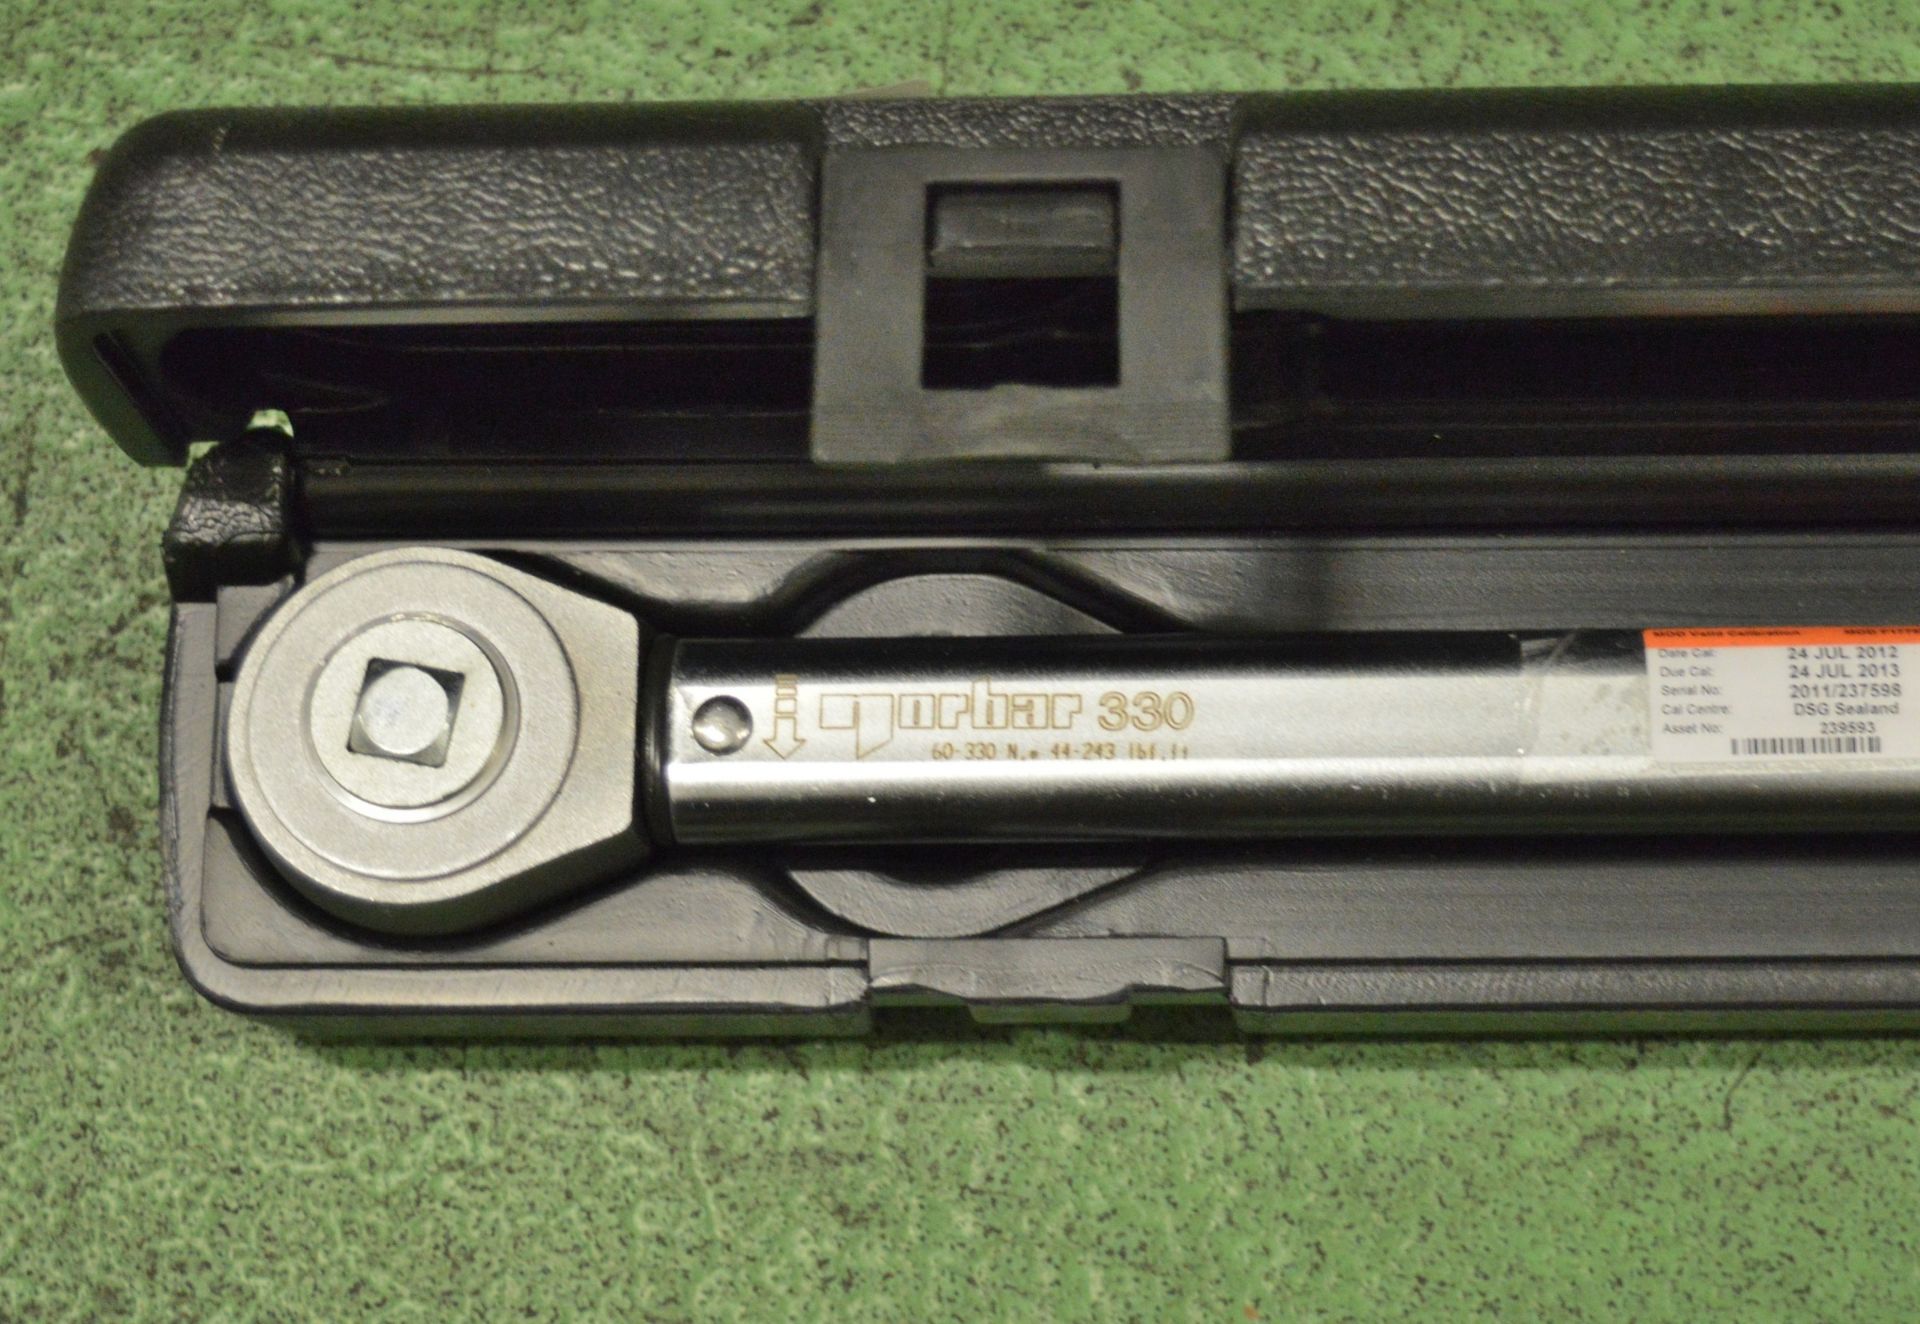 Norbar 330 Torque Wrench 45-250 ibf ft - Image 2 of 2